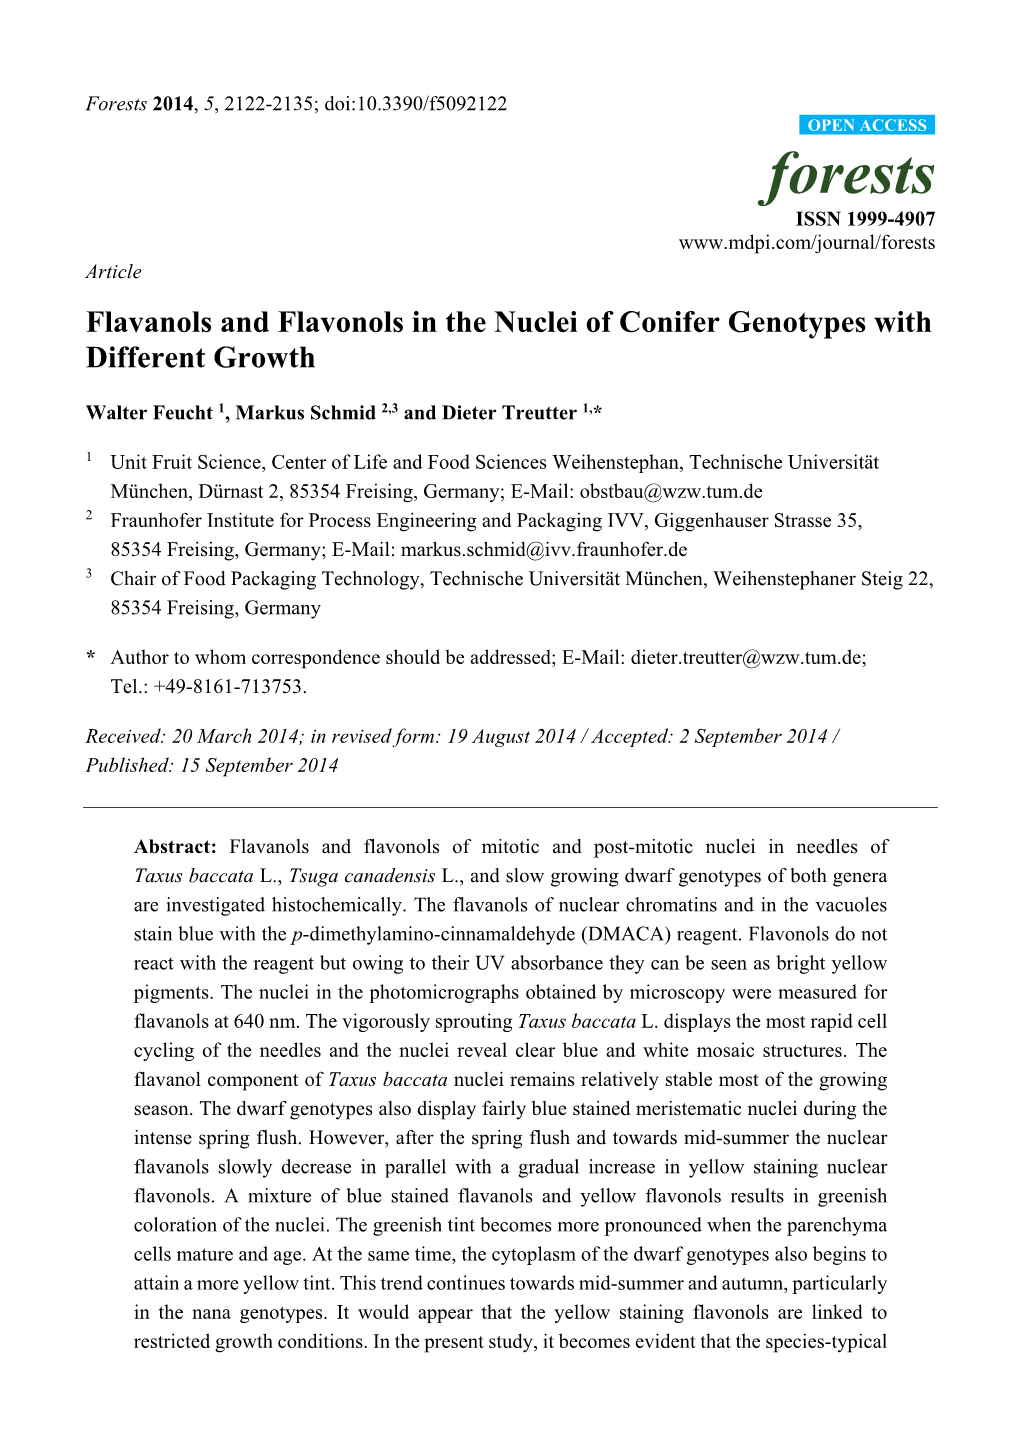 Flavanols and Flavonols in the Nuclei of Conifer Genotypes with Different Growth